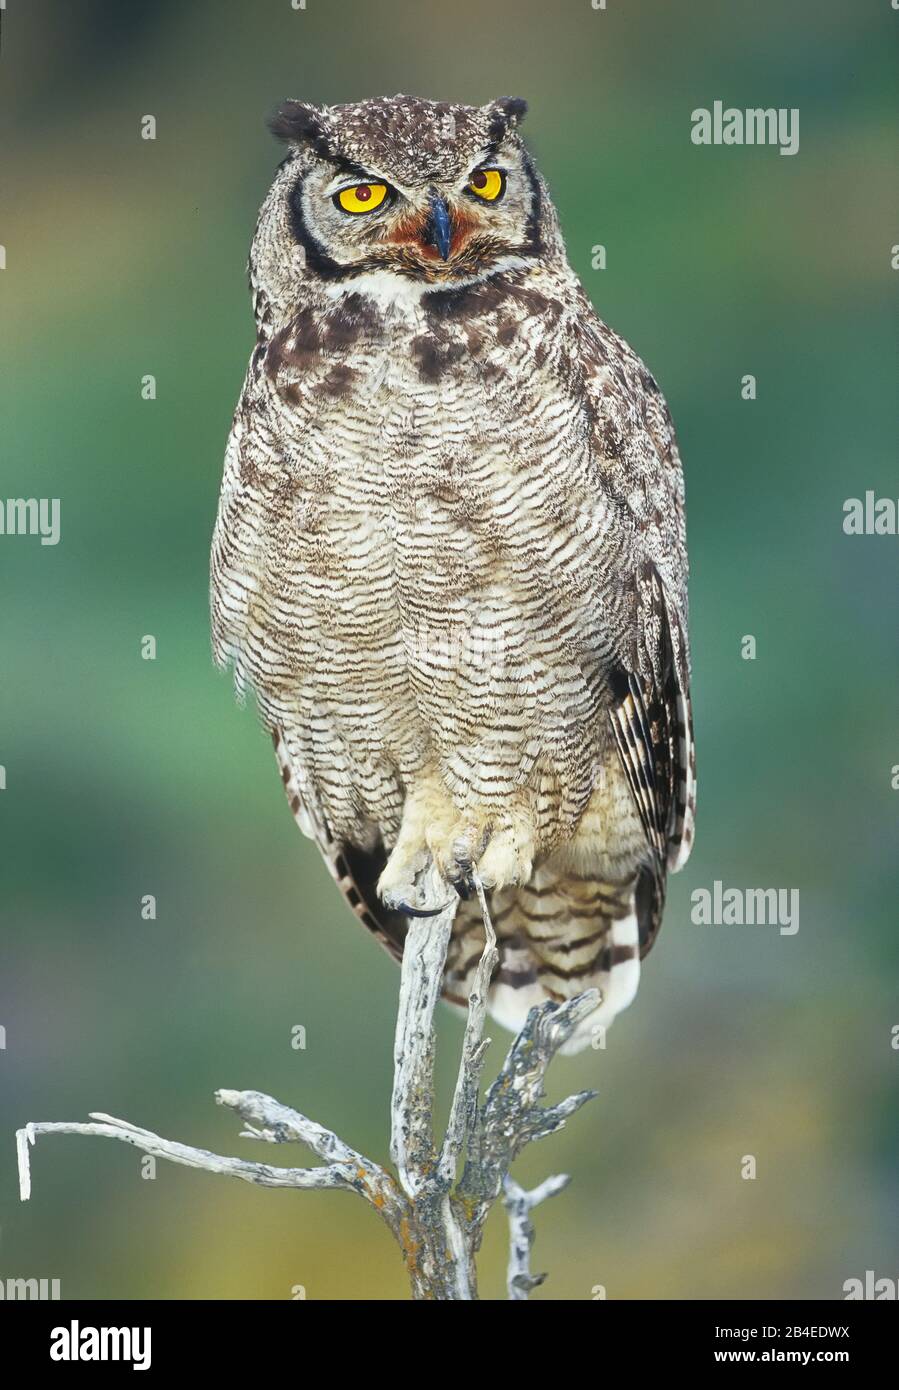 A Magellanic horned owl (Bubo magellanicus) sitting on the top of a tree, Torres del Paine National Park, Patagonia, Chile, South America Stock Photo